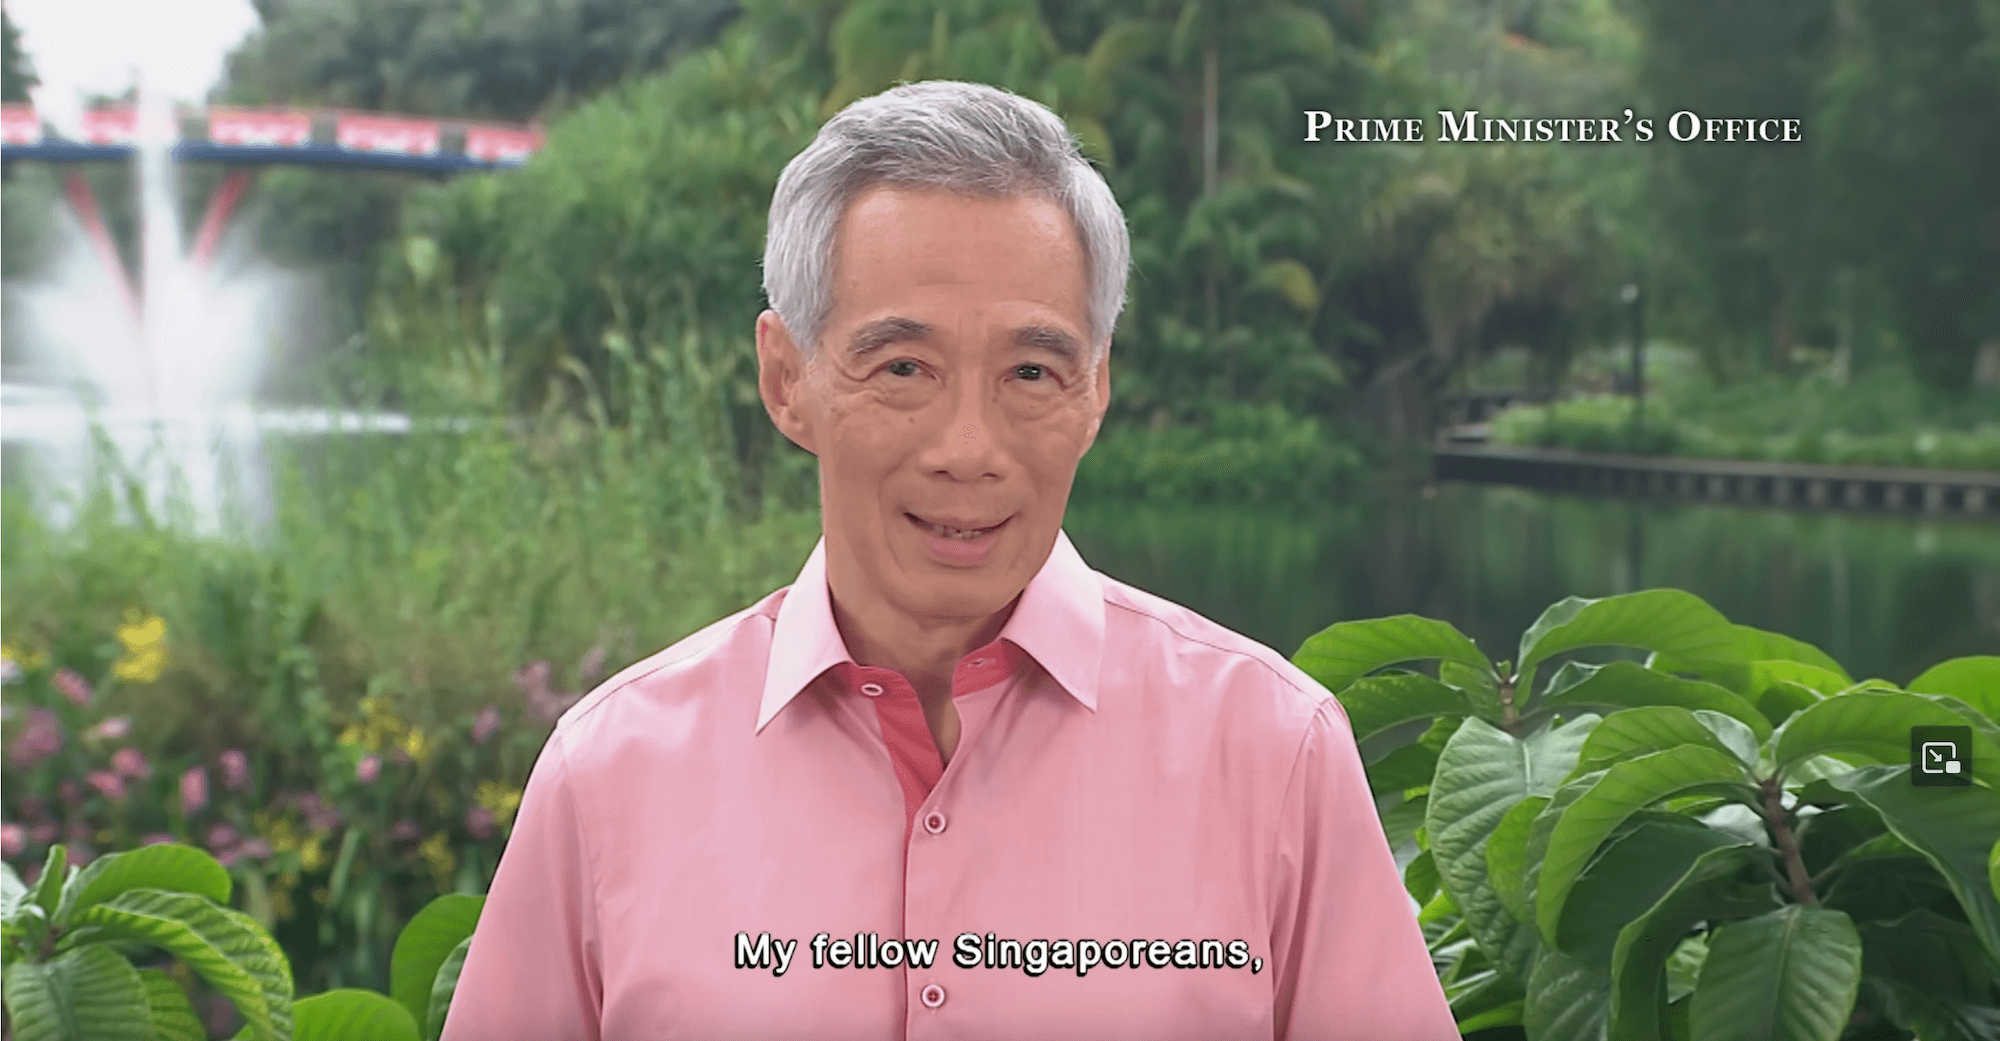 PM Lee National Day